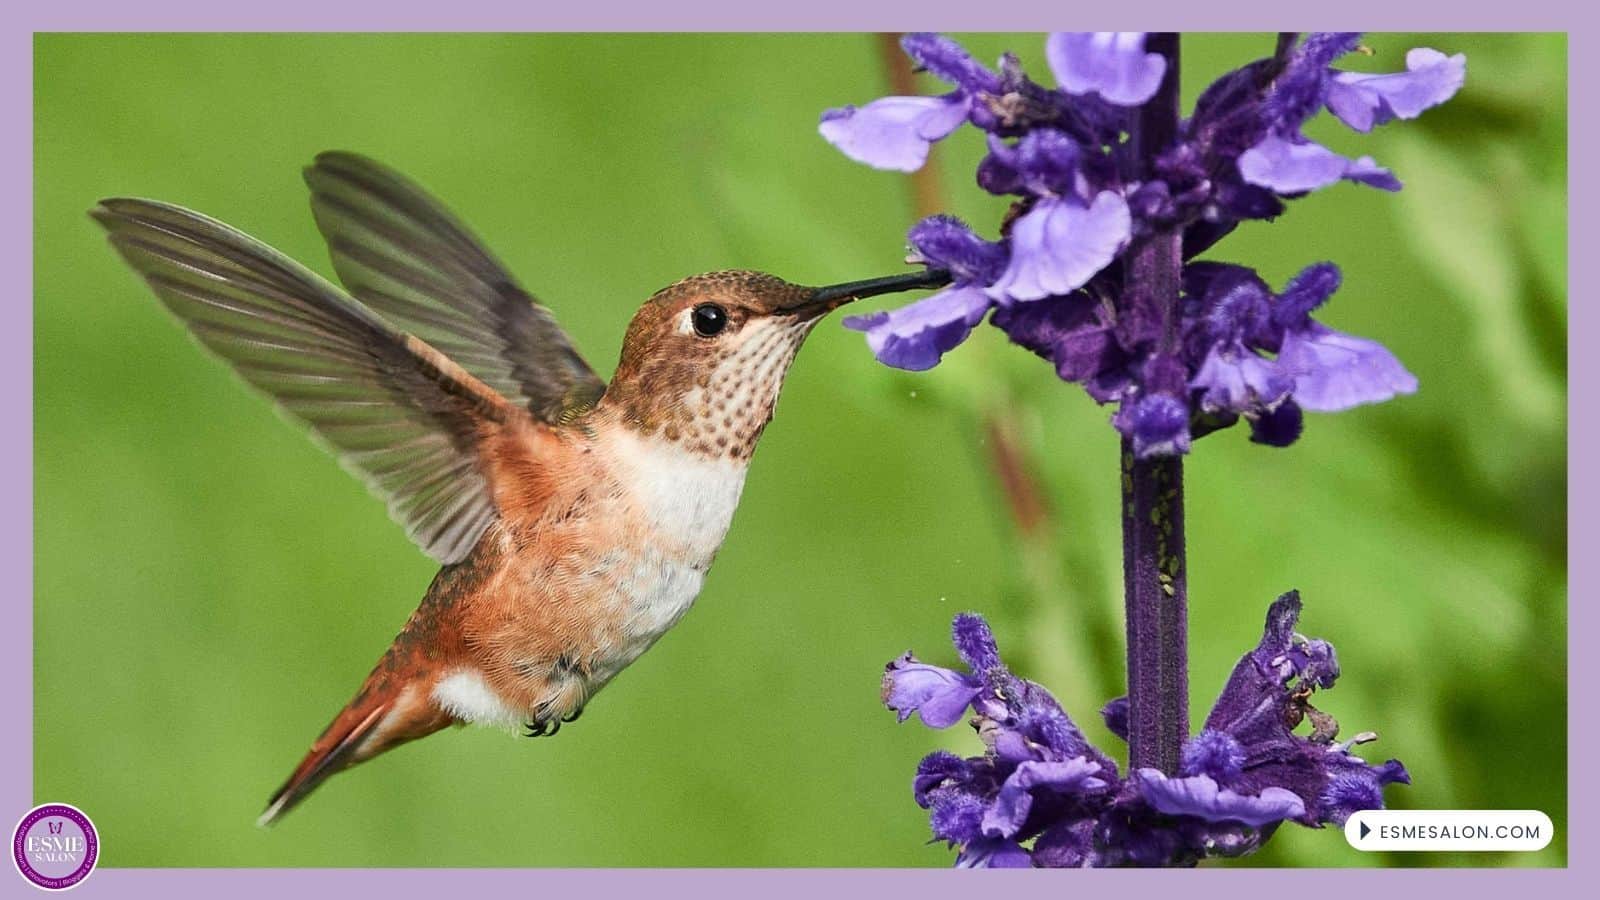 An image of a Rufous Hummingbird in backyard drinking nectar from a purple flower